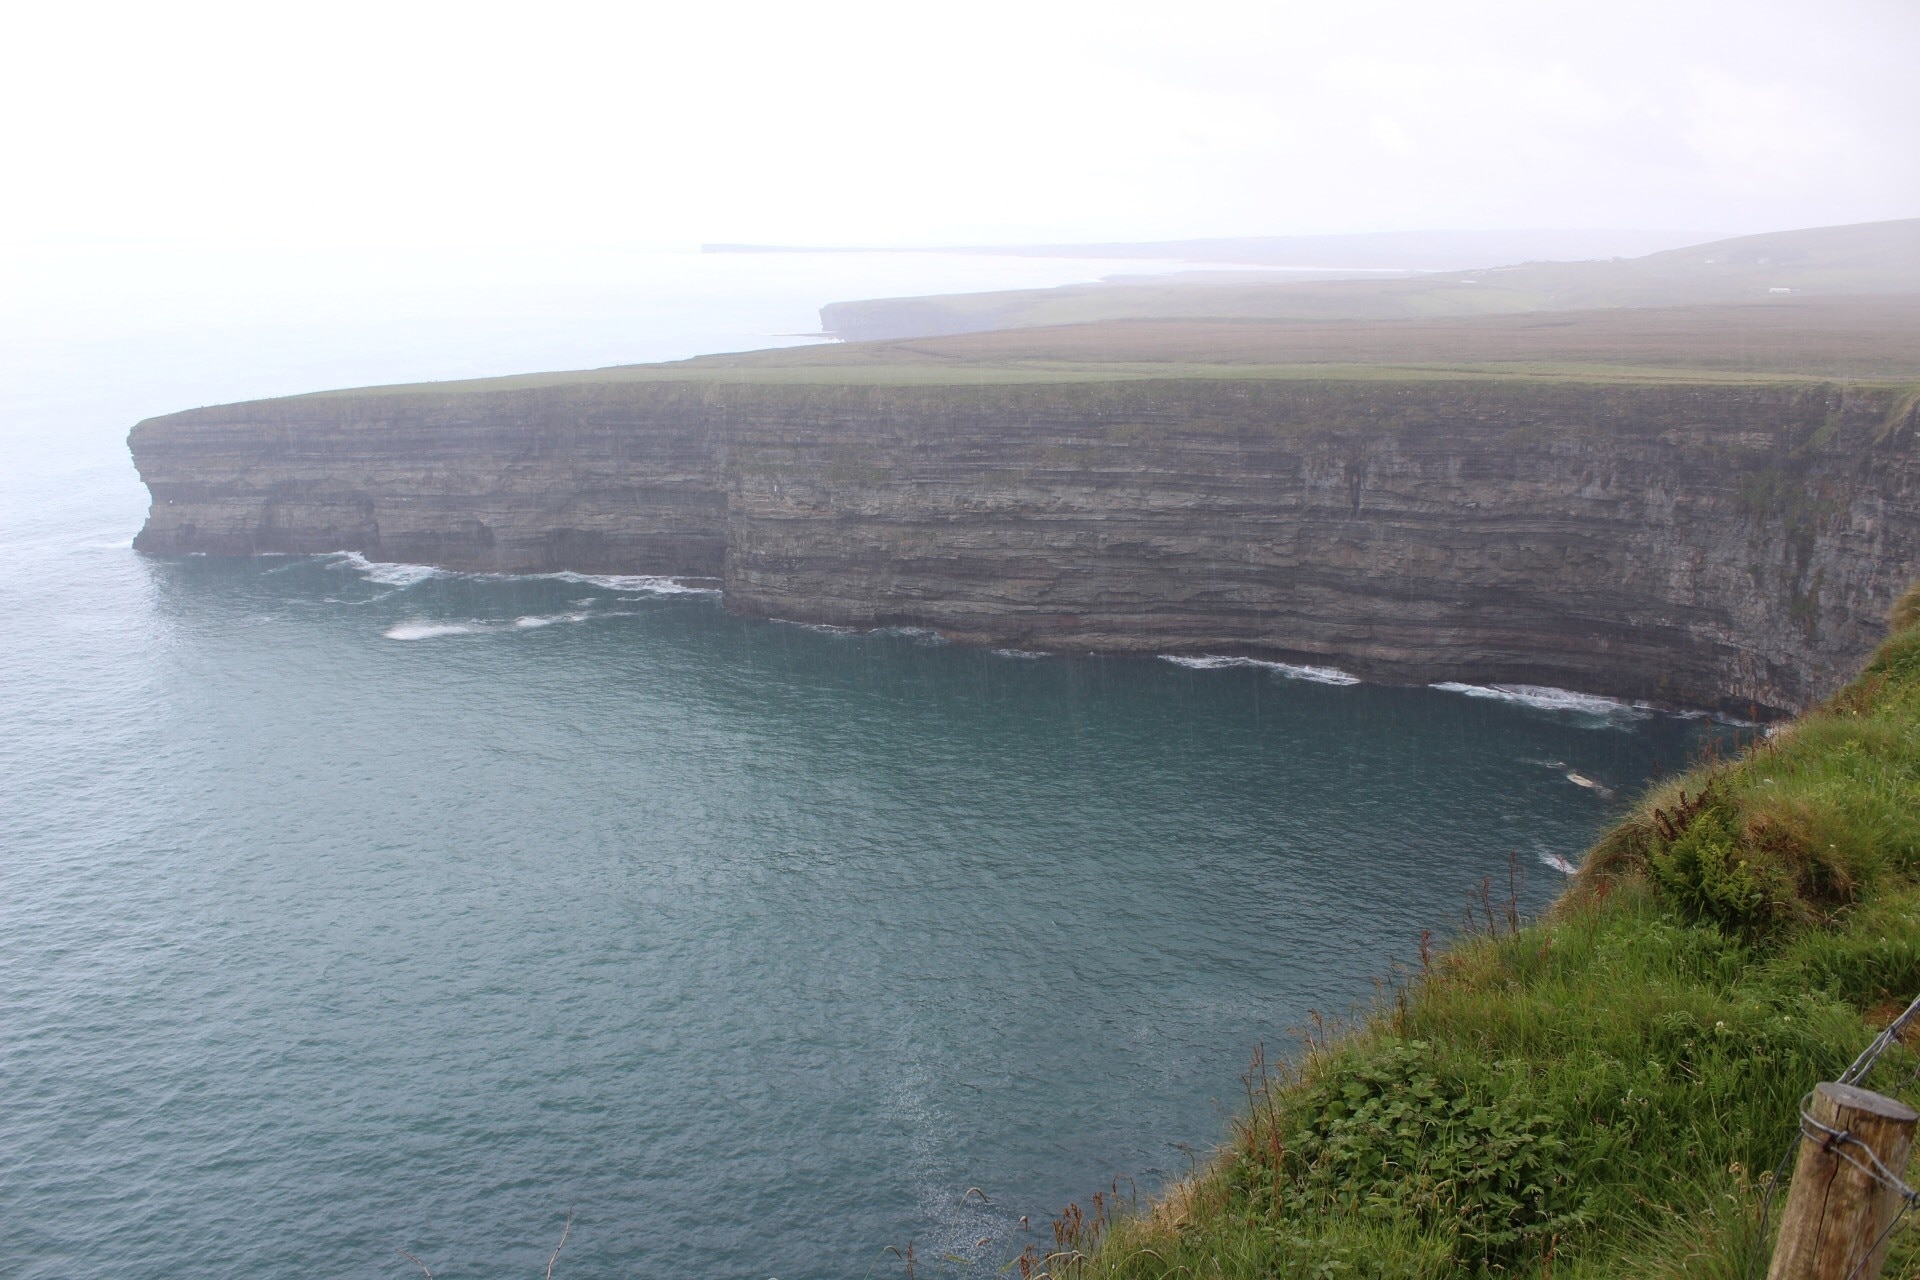 A stop along the way to Downpatrick Sea Stack, awesome cliffs and blue waters